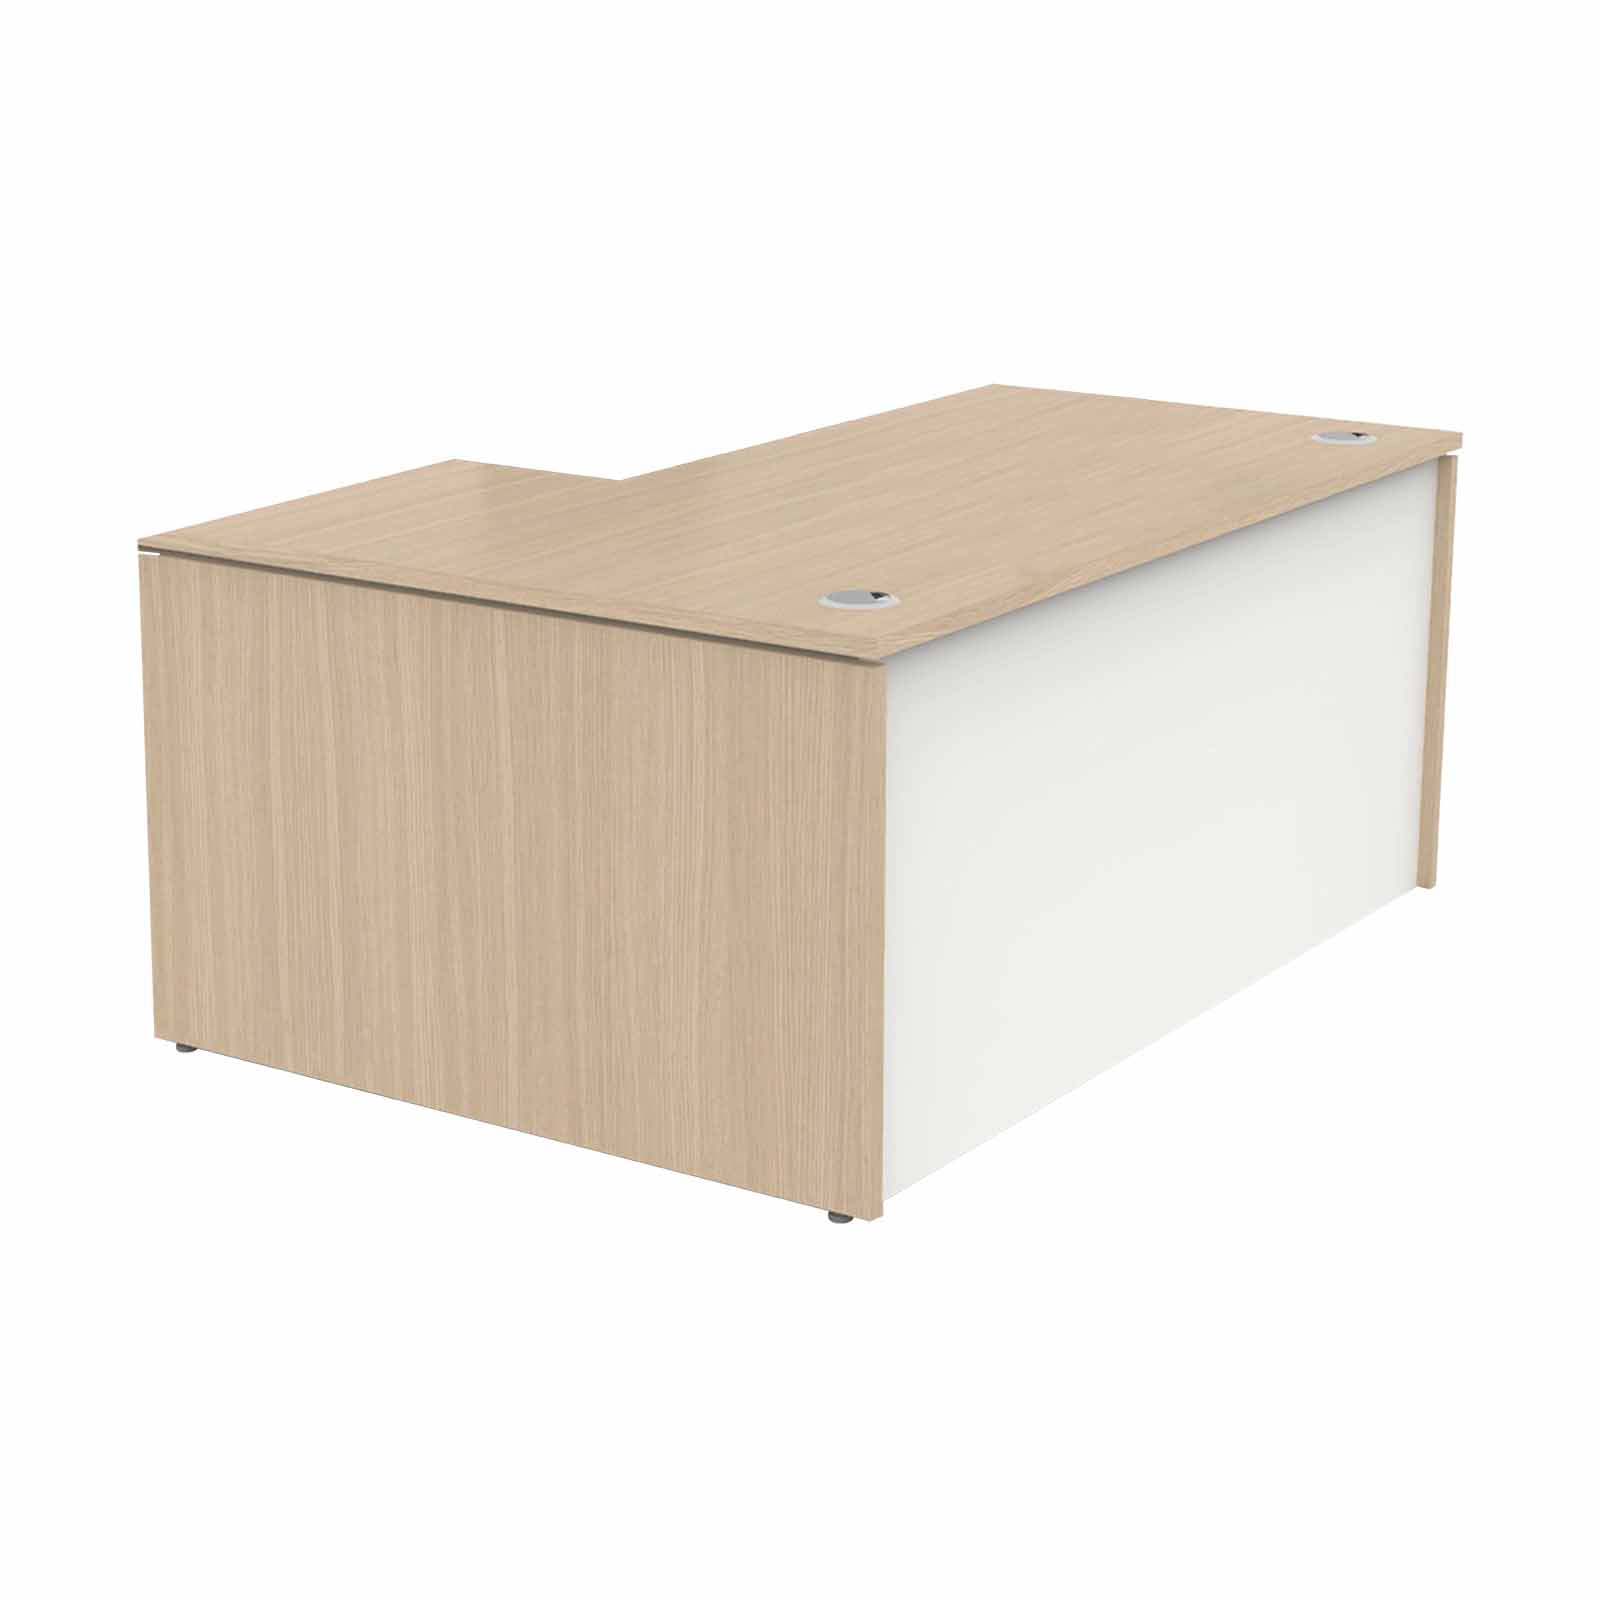 MADE TO ORDER Greeting Panel End Desk with a Return